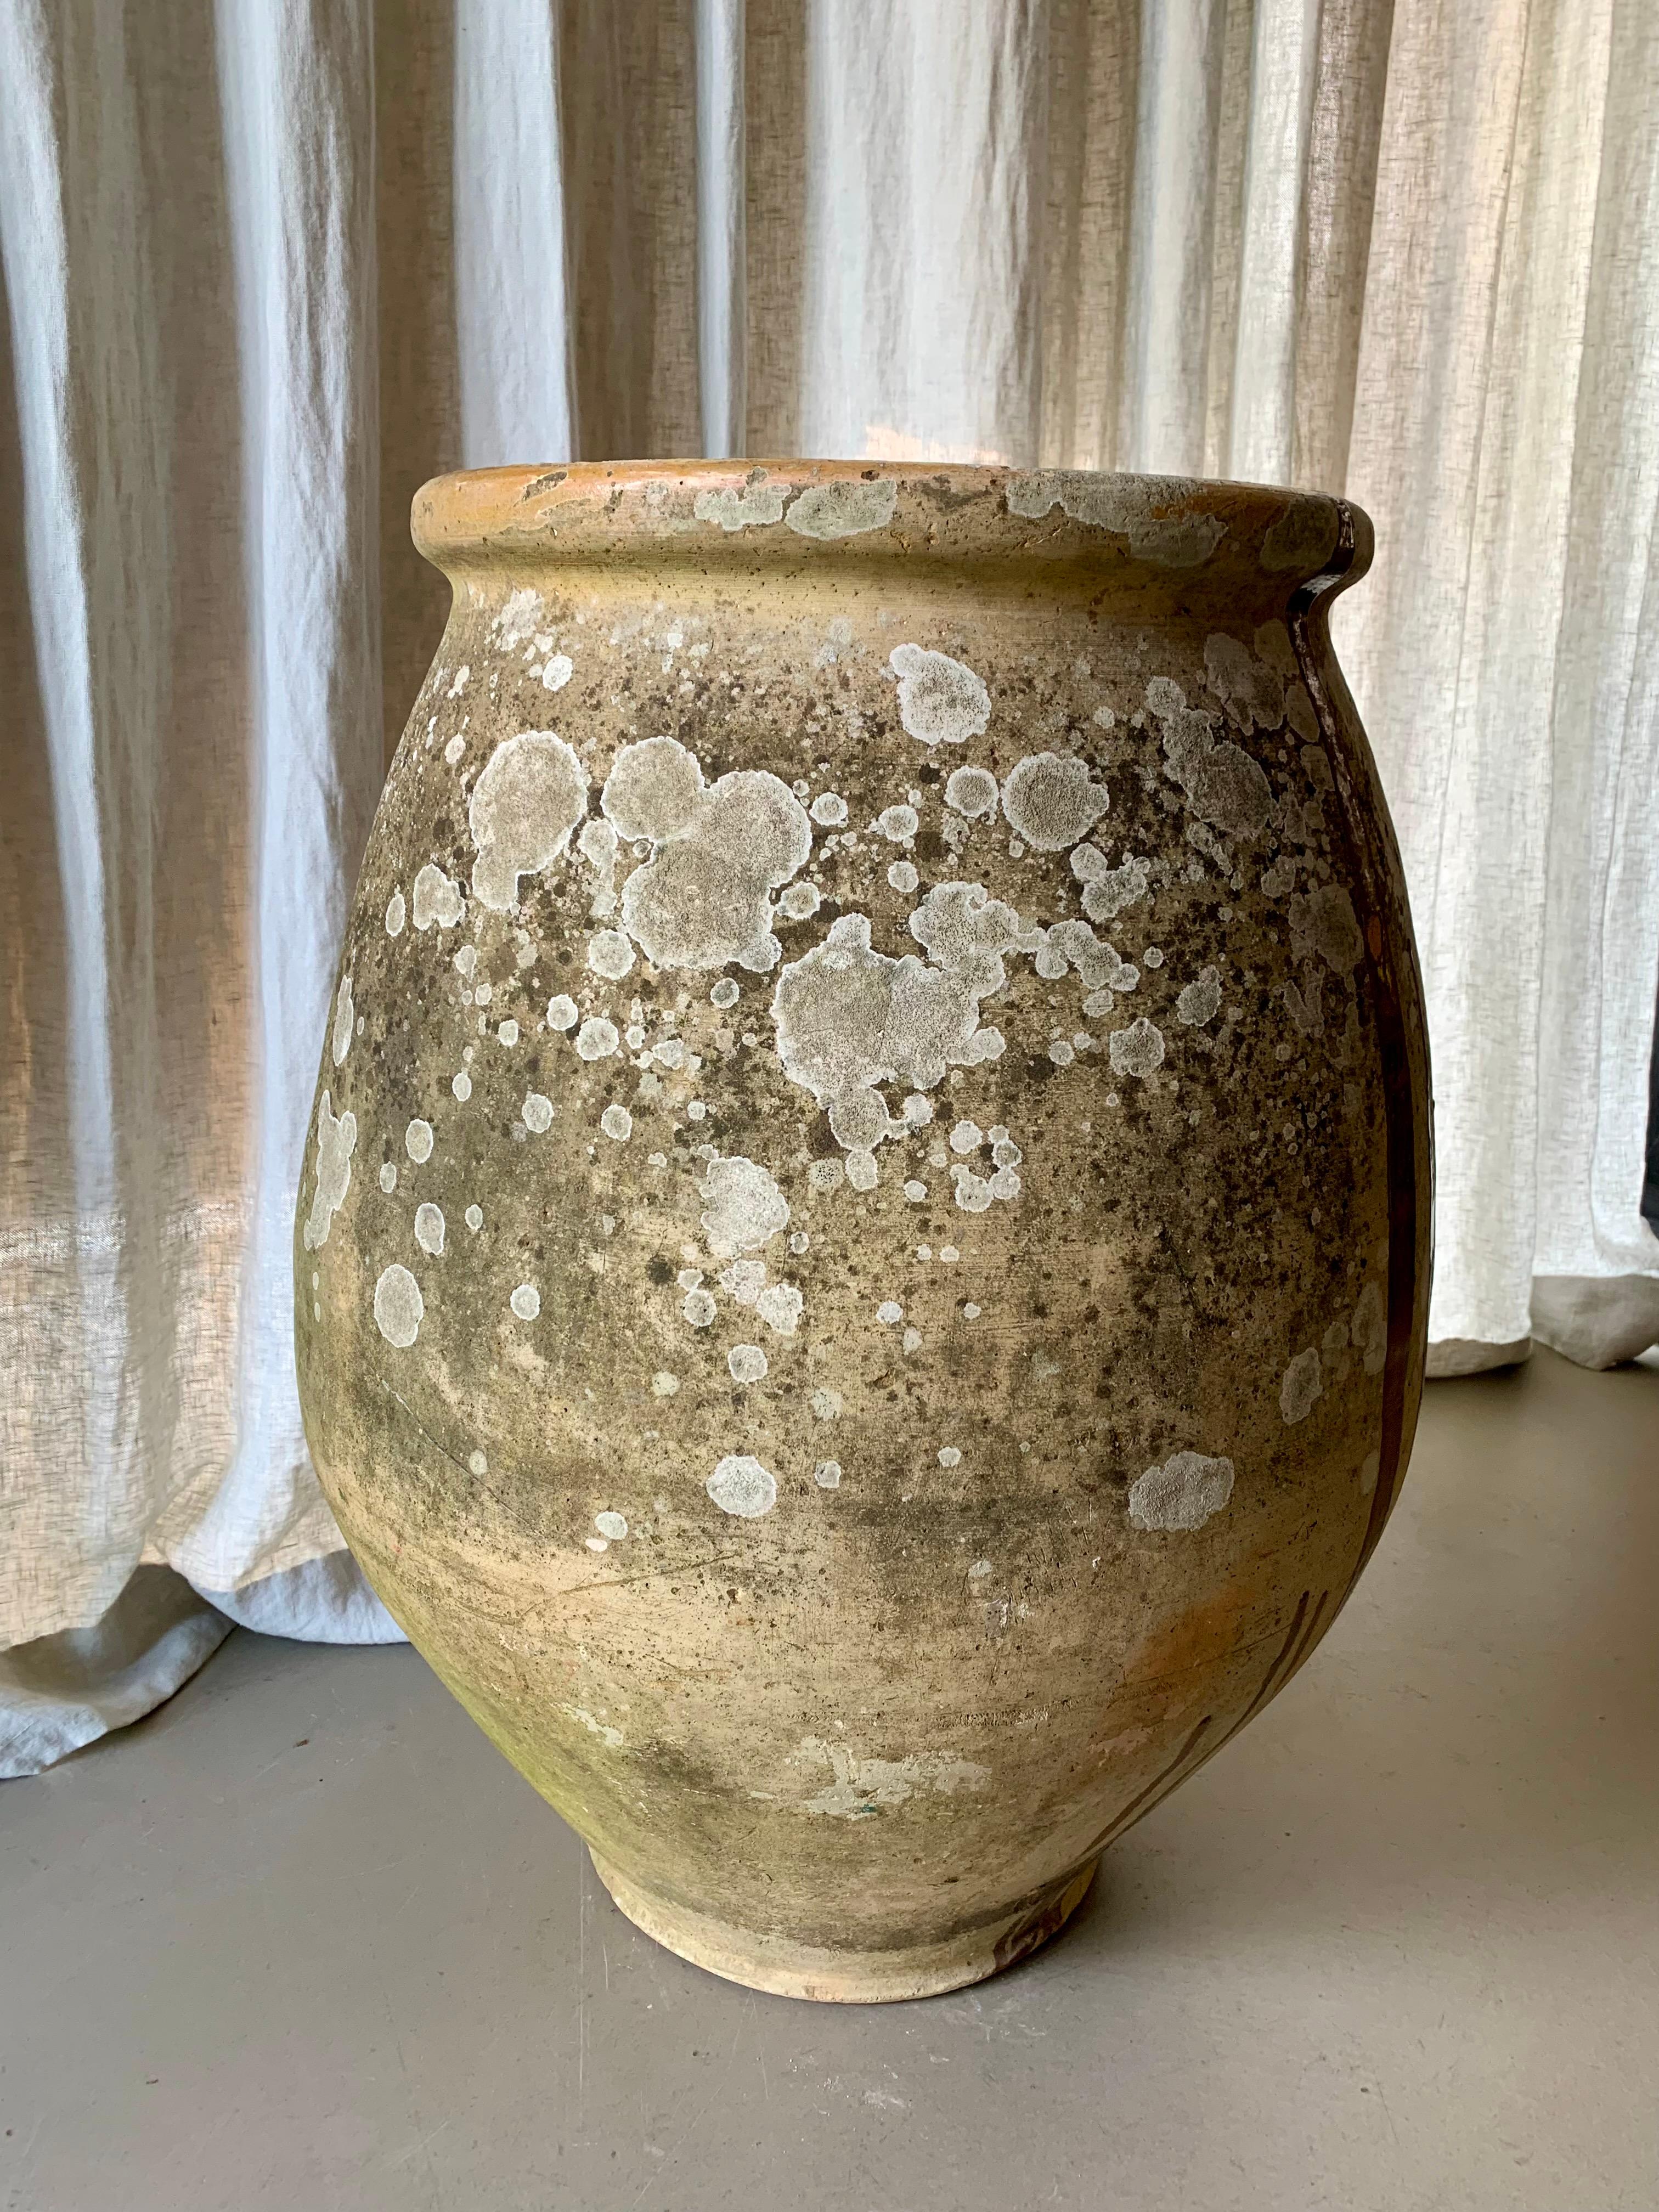 Gorgeous French Castelnaudary antique olive jar that dates from the nineteenth century. This jar with its awesome running glaze was originally used for storing olives and olive oil. Now a great piece of pottery with the most lovely patina, for a